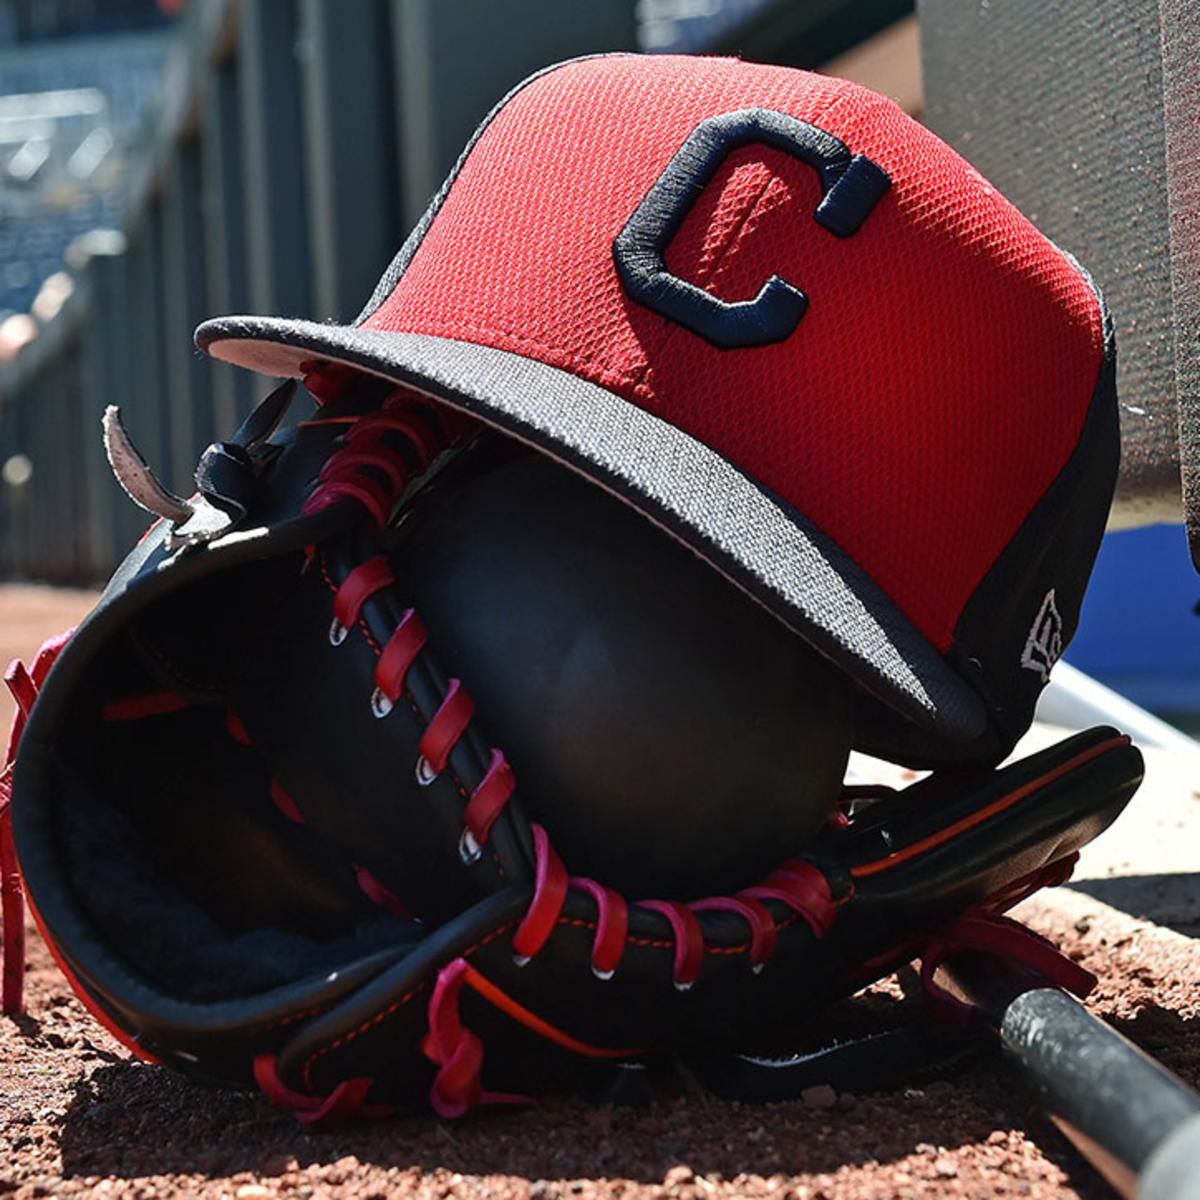 Cleveland MLB team sued over Guardians name change - Sports Illustrated